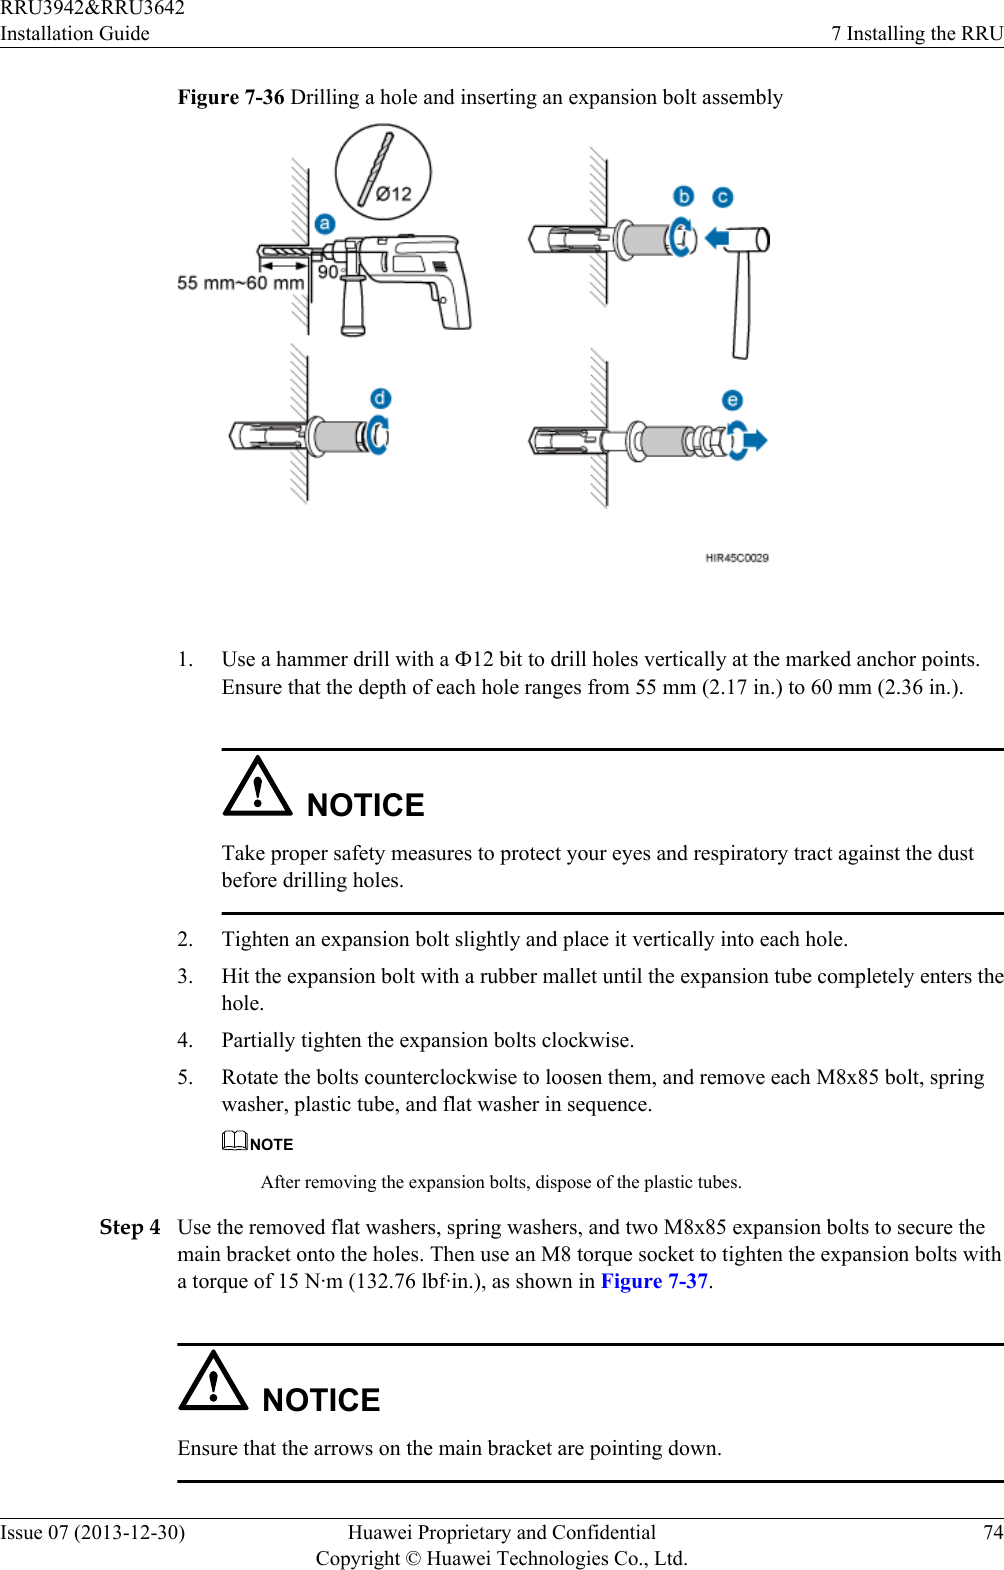 Figure 7-36 Drilling a hole and inserting an expansion bolt assembly 1. Use a hammer drill with a Ф12 bit to drill holes vertically at the marked anchor points.Ensure that the depth of each hole ranges from 55 mm (2.17 in.) to 60 mm (2.36 in.).NOTICETake proper safety measures to protect your eyes and respiratory tract against the dustbefore drilling holes.2. Tighten an expansion bolt slightly and place it vertically into each hole.3. Hit the expansion bolt with a rubber mallet until the expansion tube completely enters thehole.4. Partially tighten the expansion bolts clockwise.5. Rotate the bolts counterclockwise to loosen them, and remove each M8x85 bolt, springwasher, plastic tube, and flat washer in sequence.NOTEAfter removing the expansion bolts, dispose of the plastic tubes.Step 4 Use the removed flat washers, spring washers, and two M8x85 expansion bolts to secure themain bracket onto the holes. Then use an M8 torque socket to tighten the expansion bolts witha torque of 15 N·m (132.76 lbf·in.), as shown in Figure 7-37.NOTICEEnsure that the arrows on the main bracket are pointing down.RRU3942&amp;RRU3642Installation Guide 7 Installing the RRUIssue 07 (2013-12-30) Huawei Proprietary and ConfidentialCopyright © Huawei Technologies Co., Ltd.74